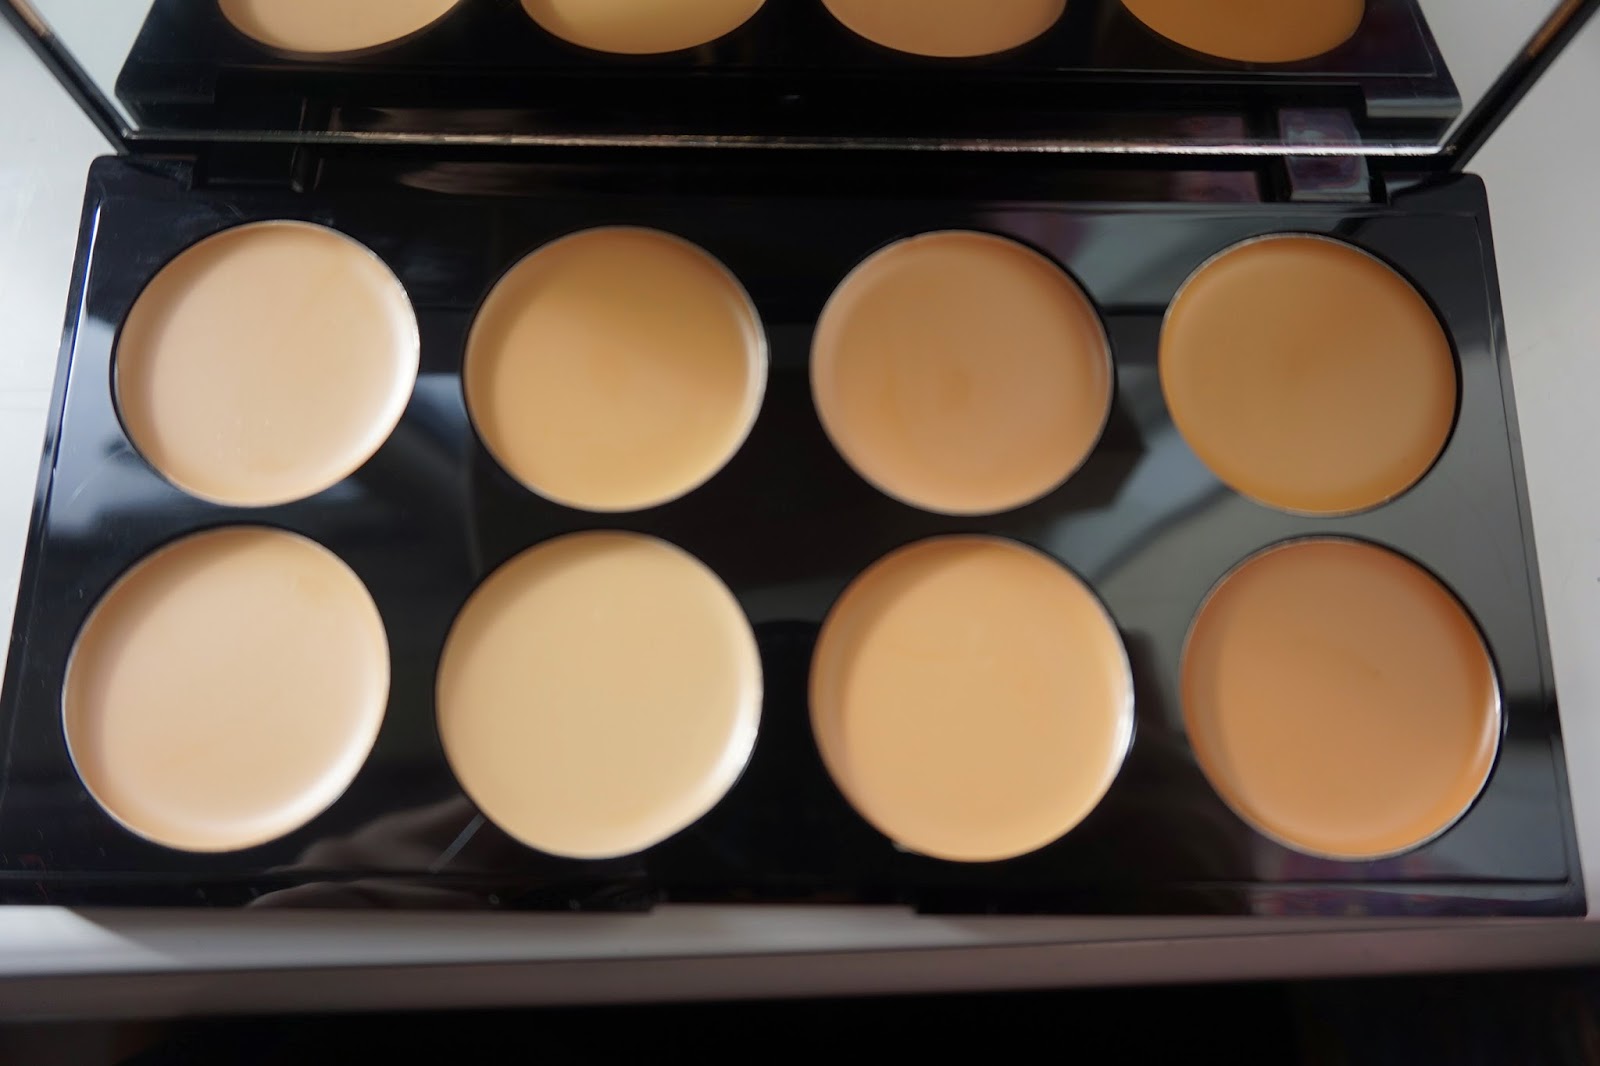 Makeup Revolution Ultra Cover and Concealer Palette Light -  Medium- Dusty Foxes Beauty Blog